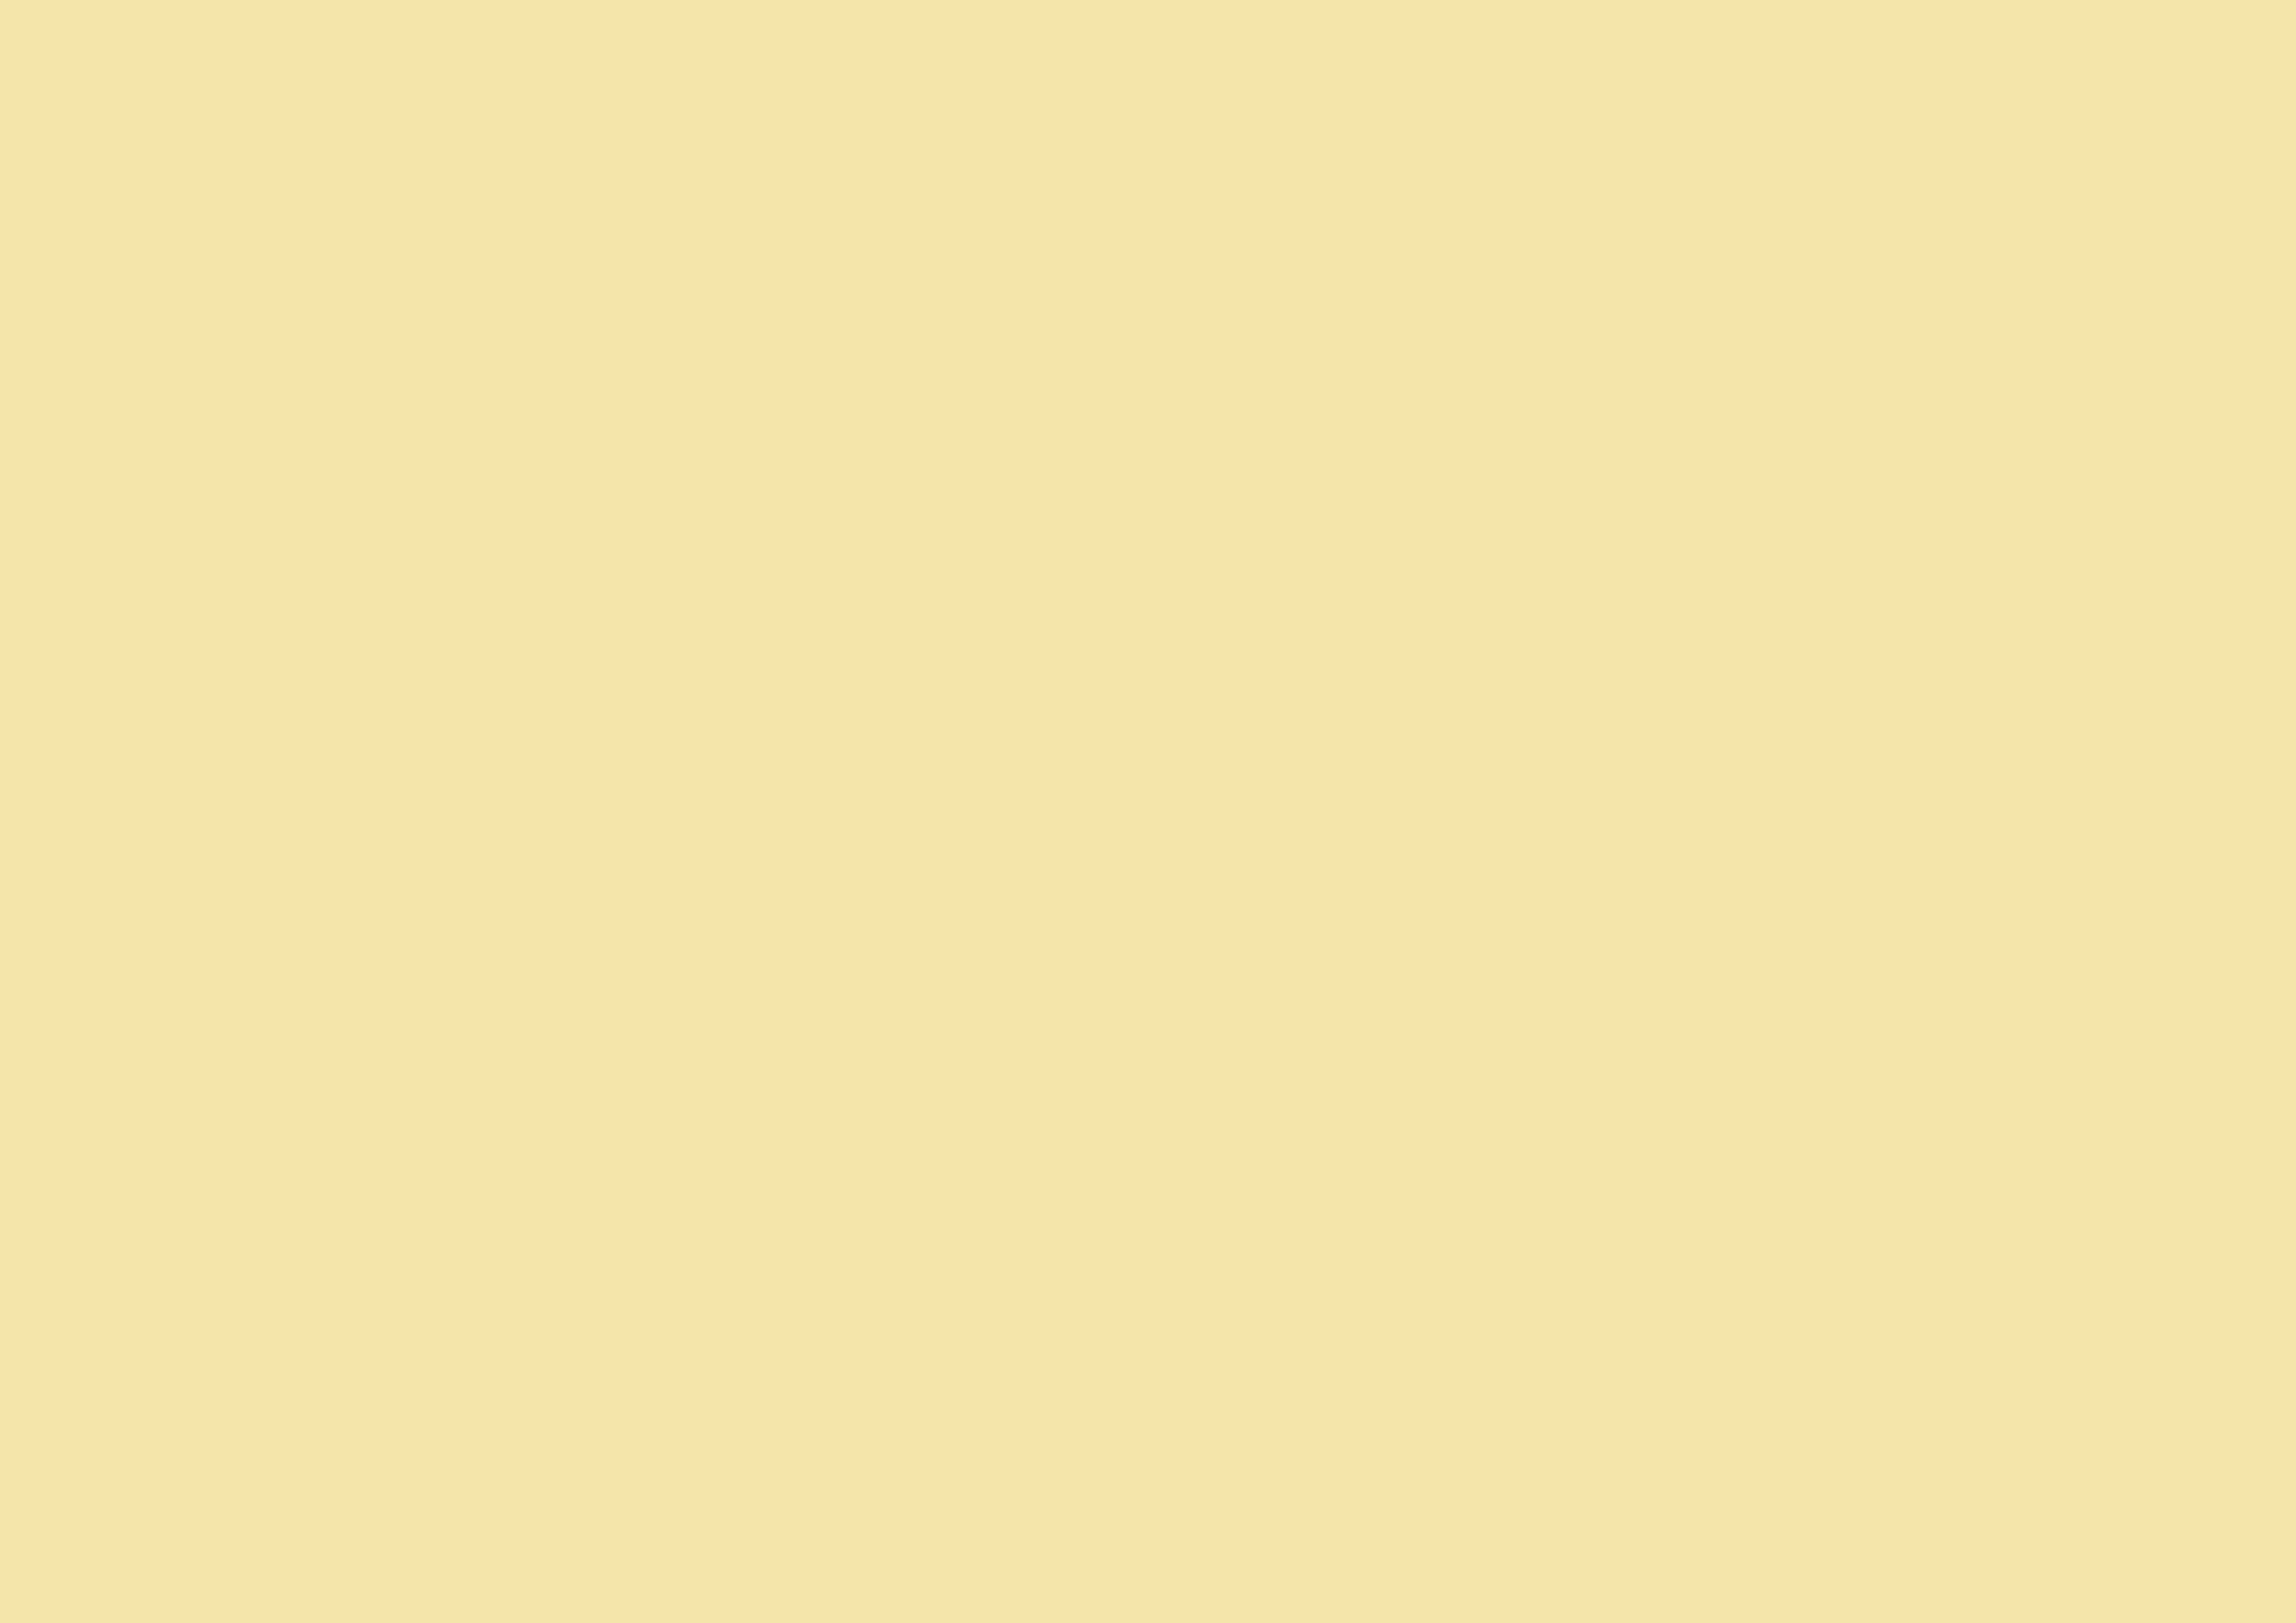 3508x2480 Medium Champagne Solid Color Background